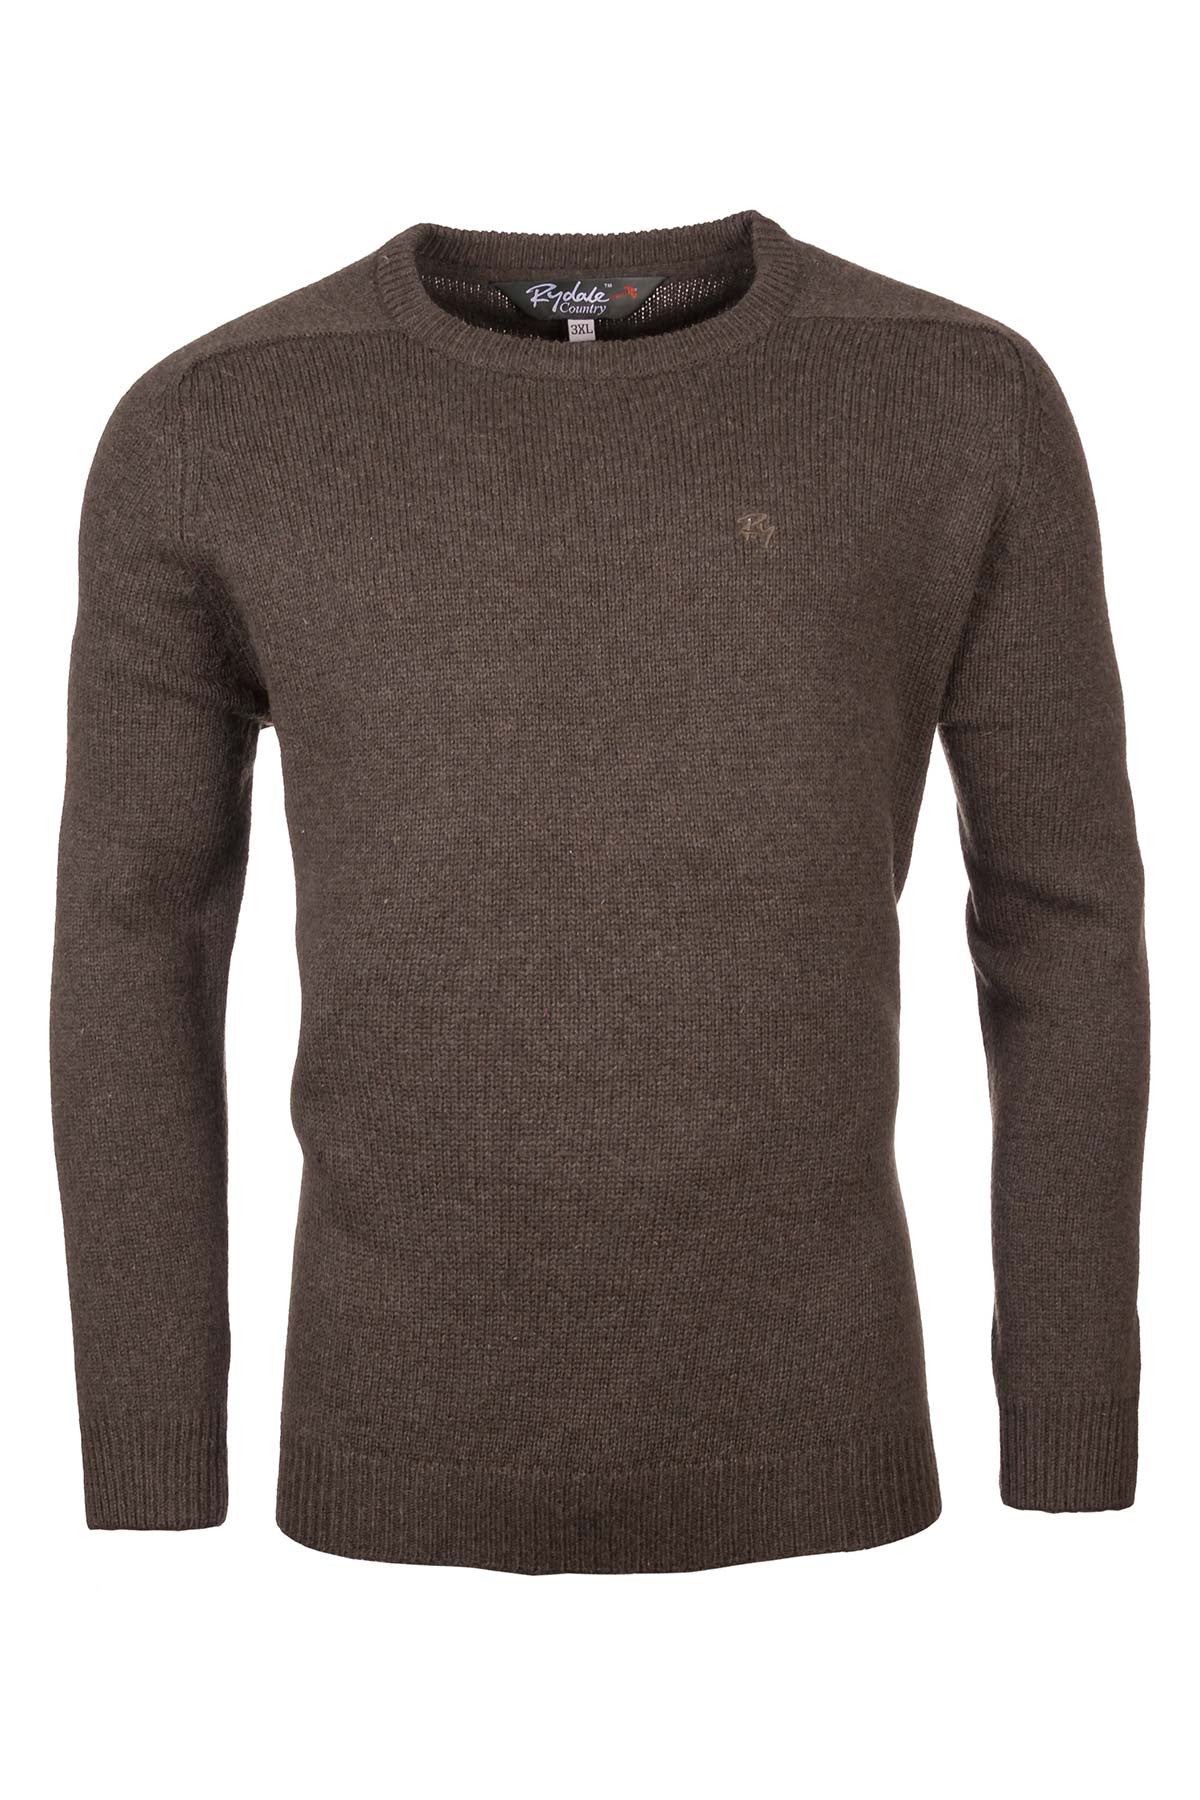 Mens Smooth Knit Lambswool Jumper UK | Rydale